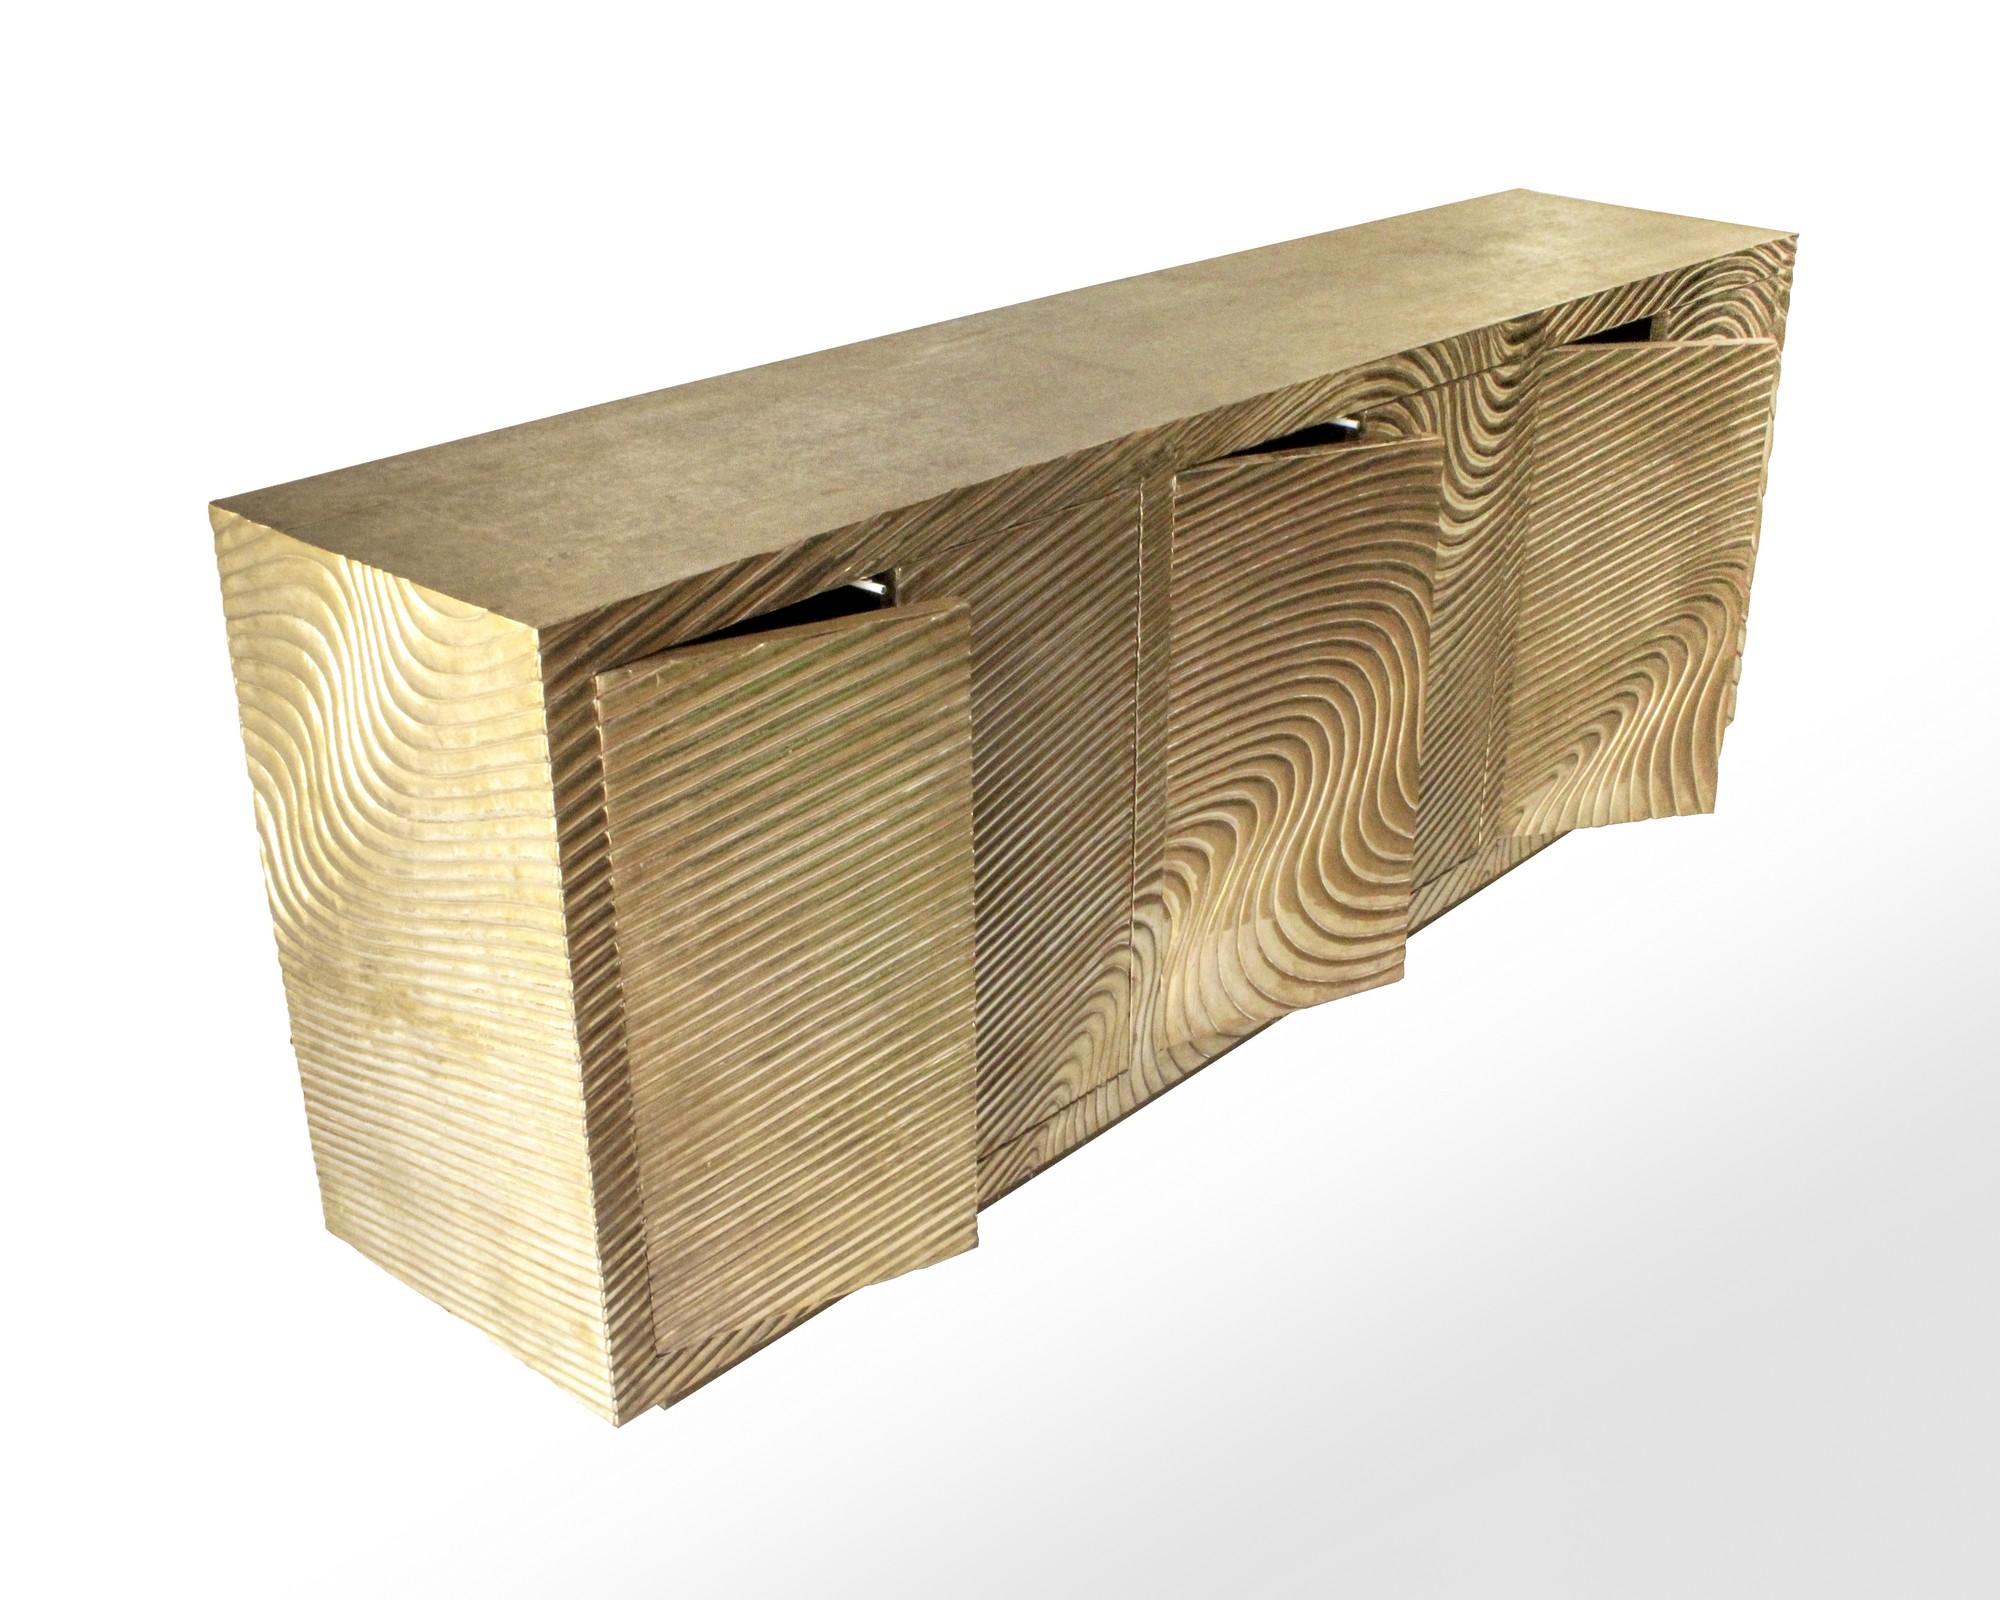 Inspired by the waves of the ocean, hand made from solid teak which is joined to form the clean and elegant outline. This piece is made by centuries old local technique of cladding metal carved wood.
The available options for metal cladding are